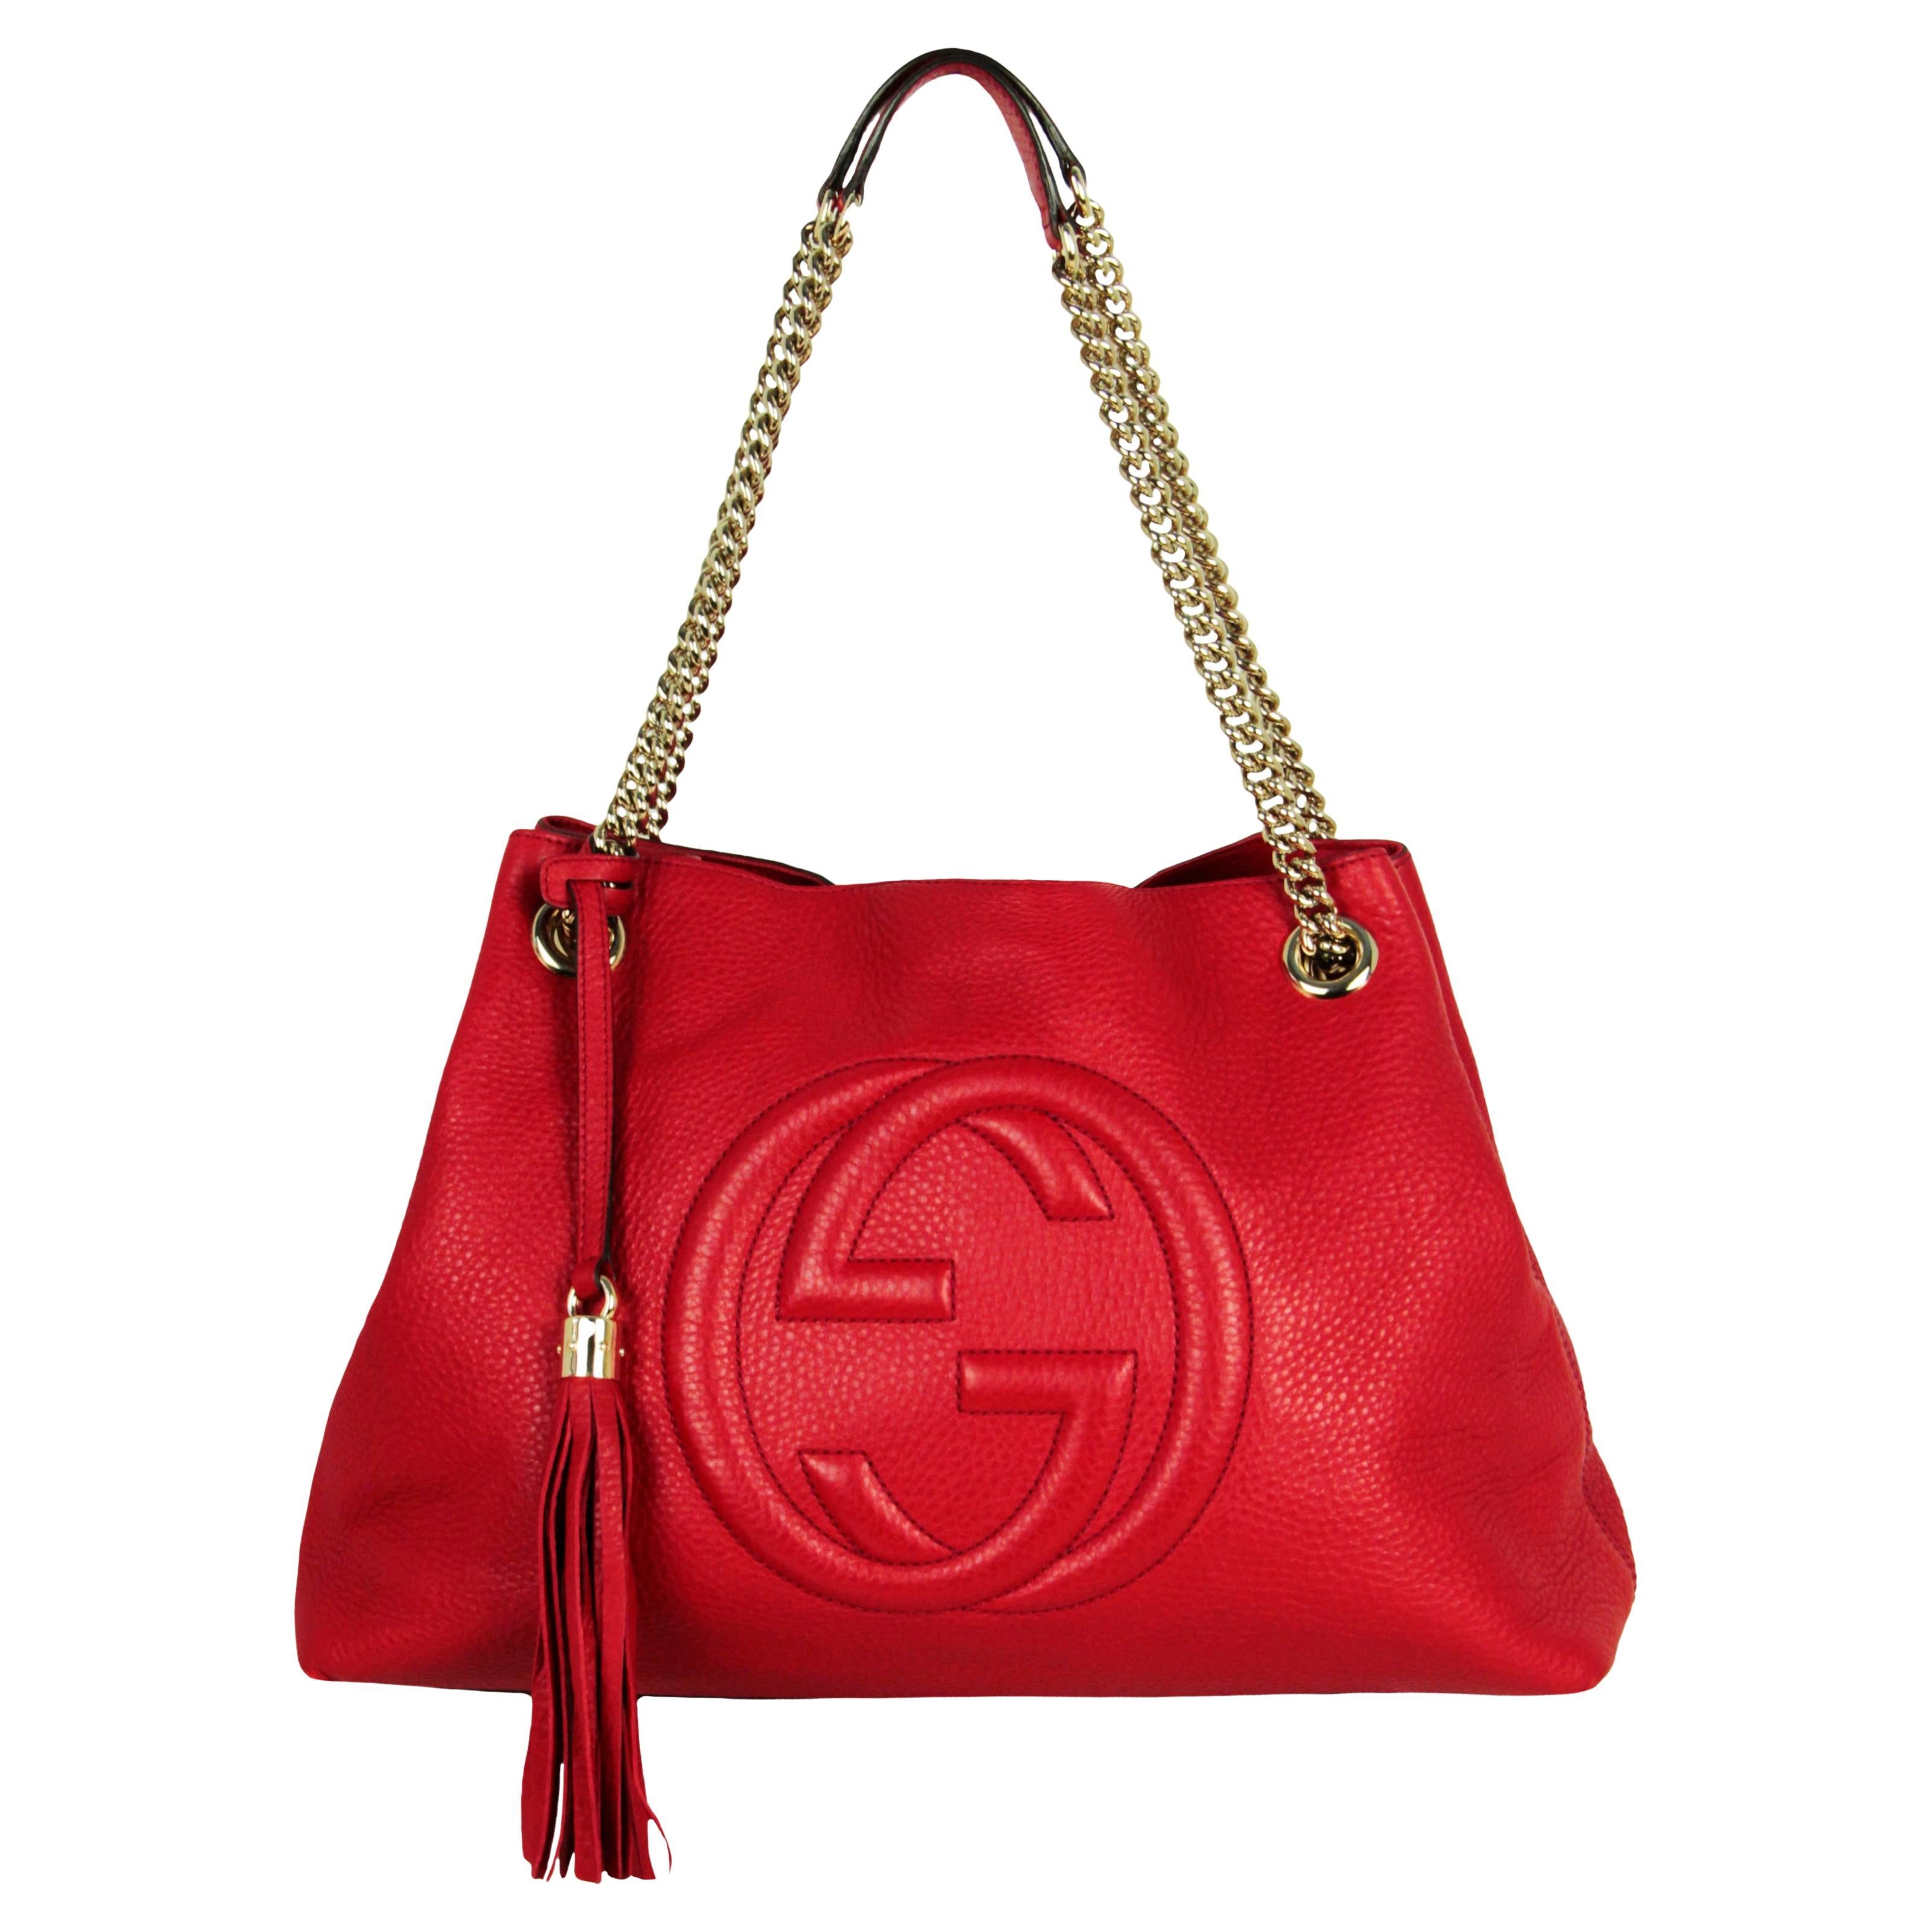 Gucci Red Pebbled Calfskin Leather GG Soho Chain Tote Bag